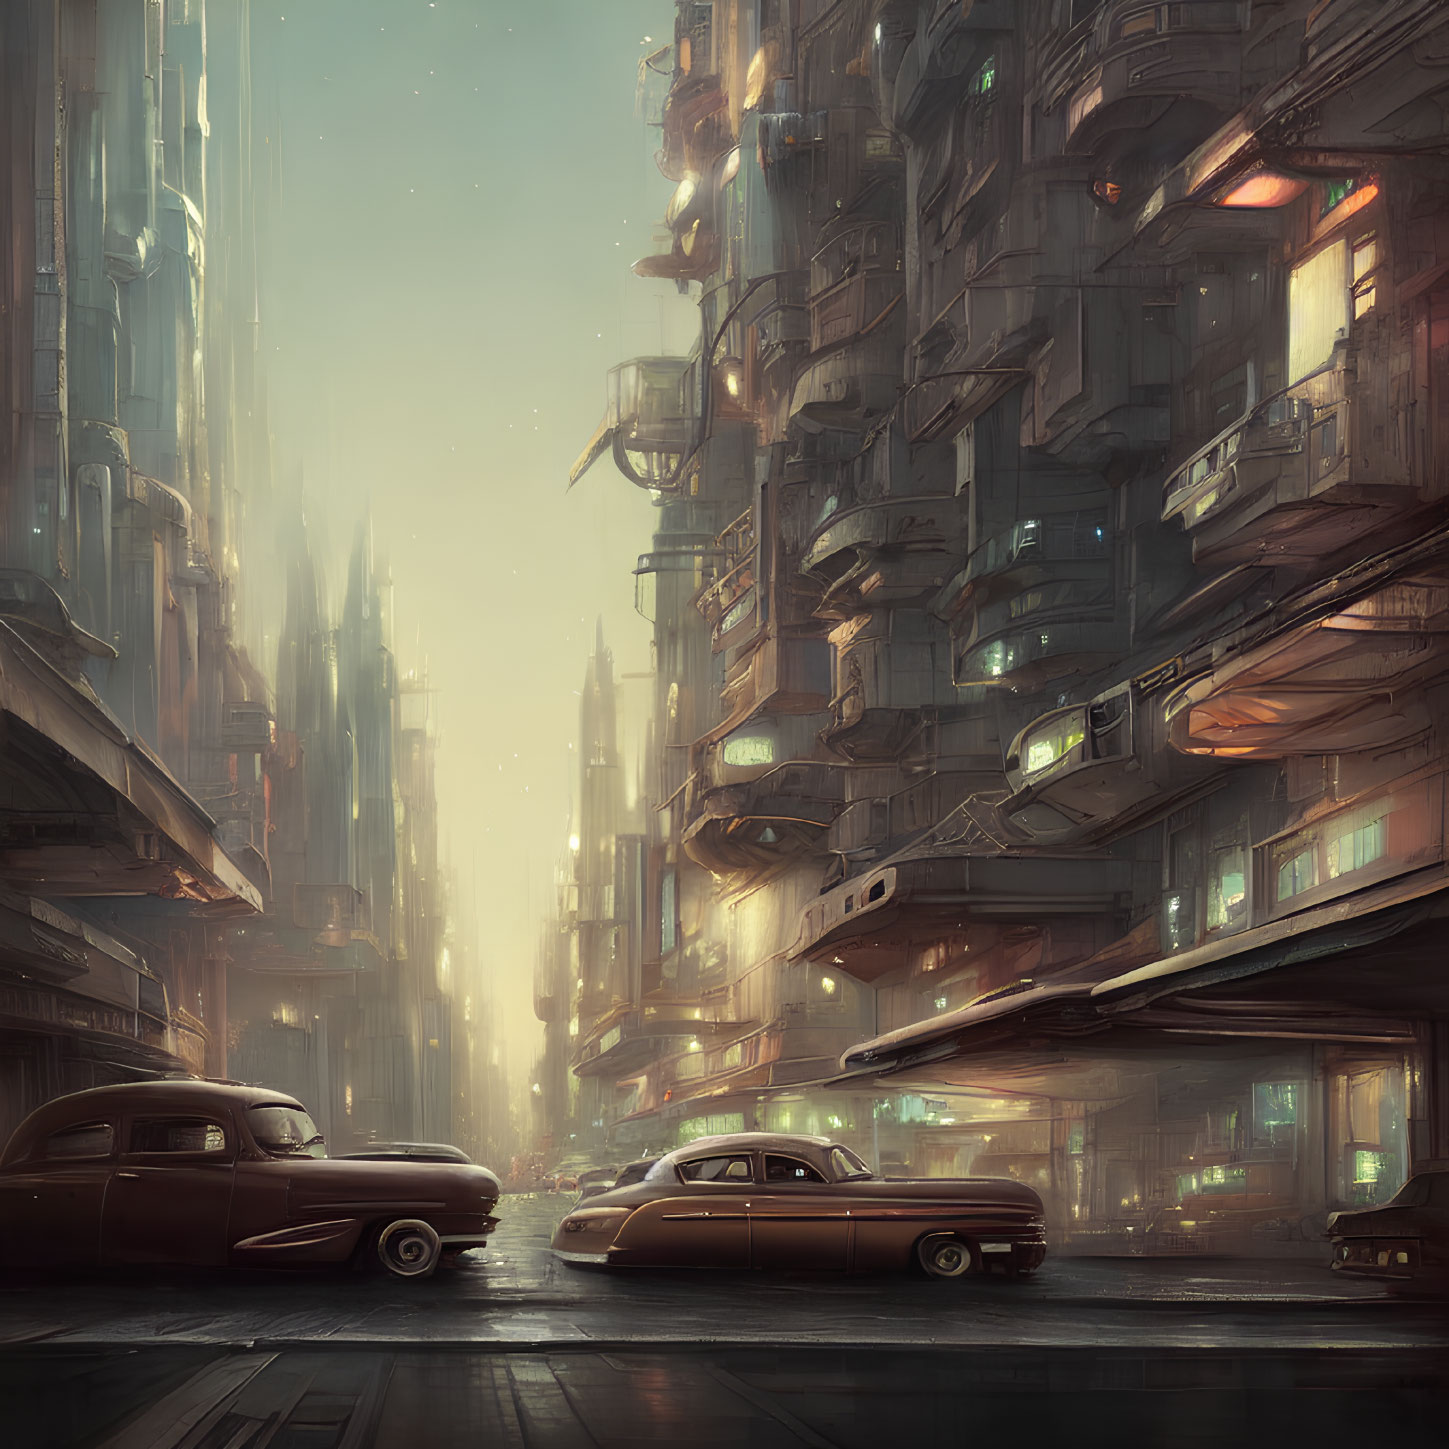 Futuristic cityscape with towering buildings and vintage cars